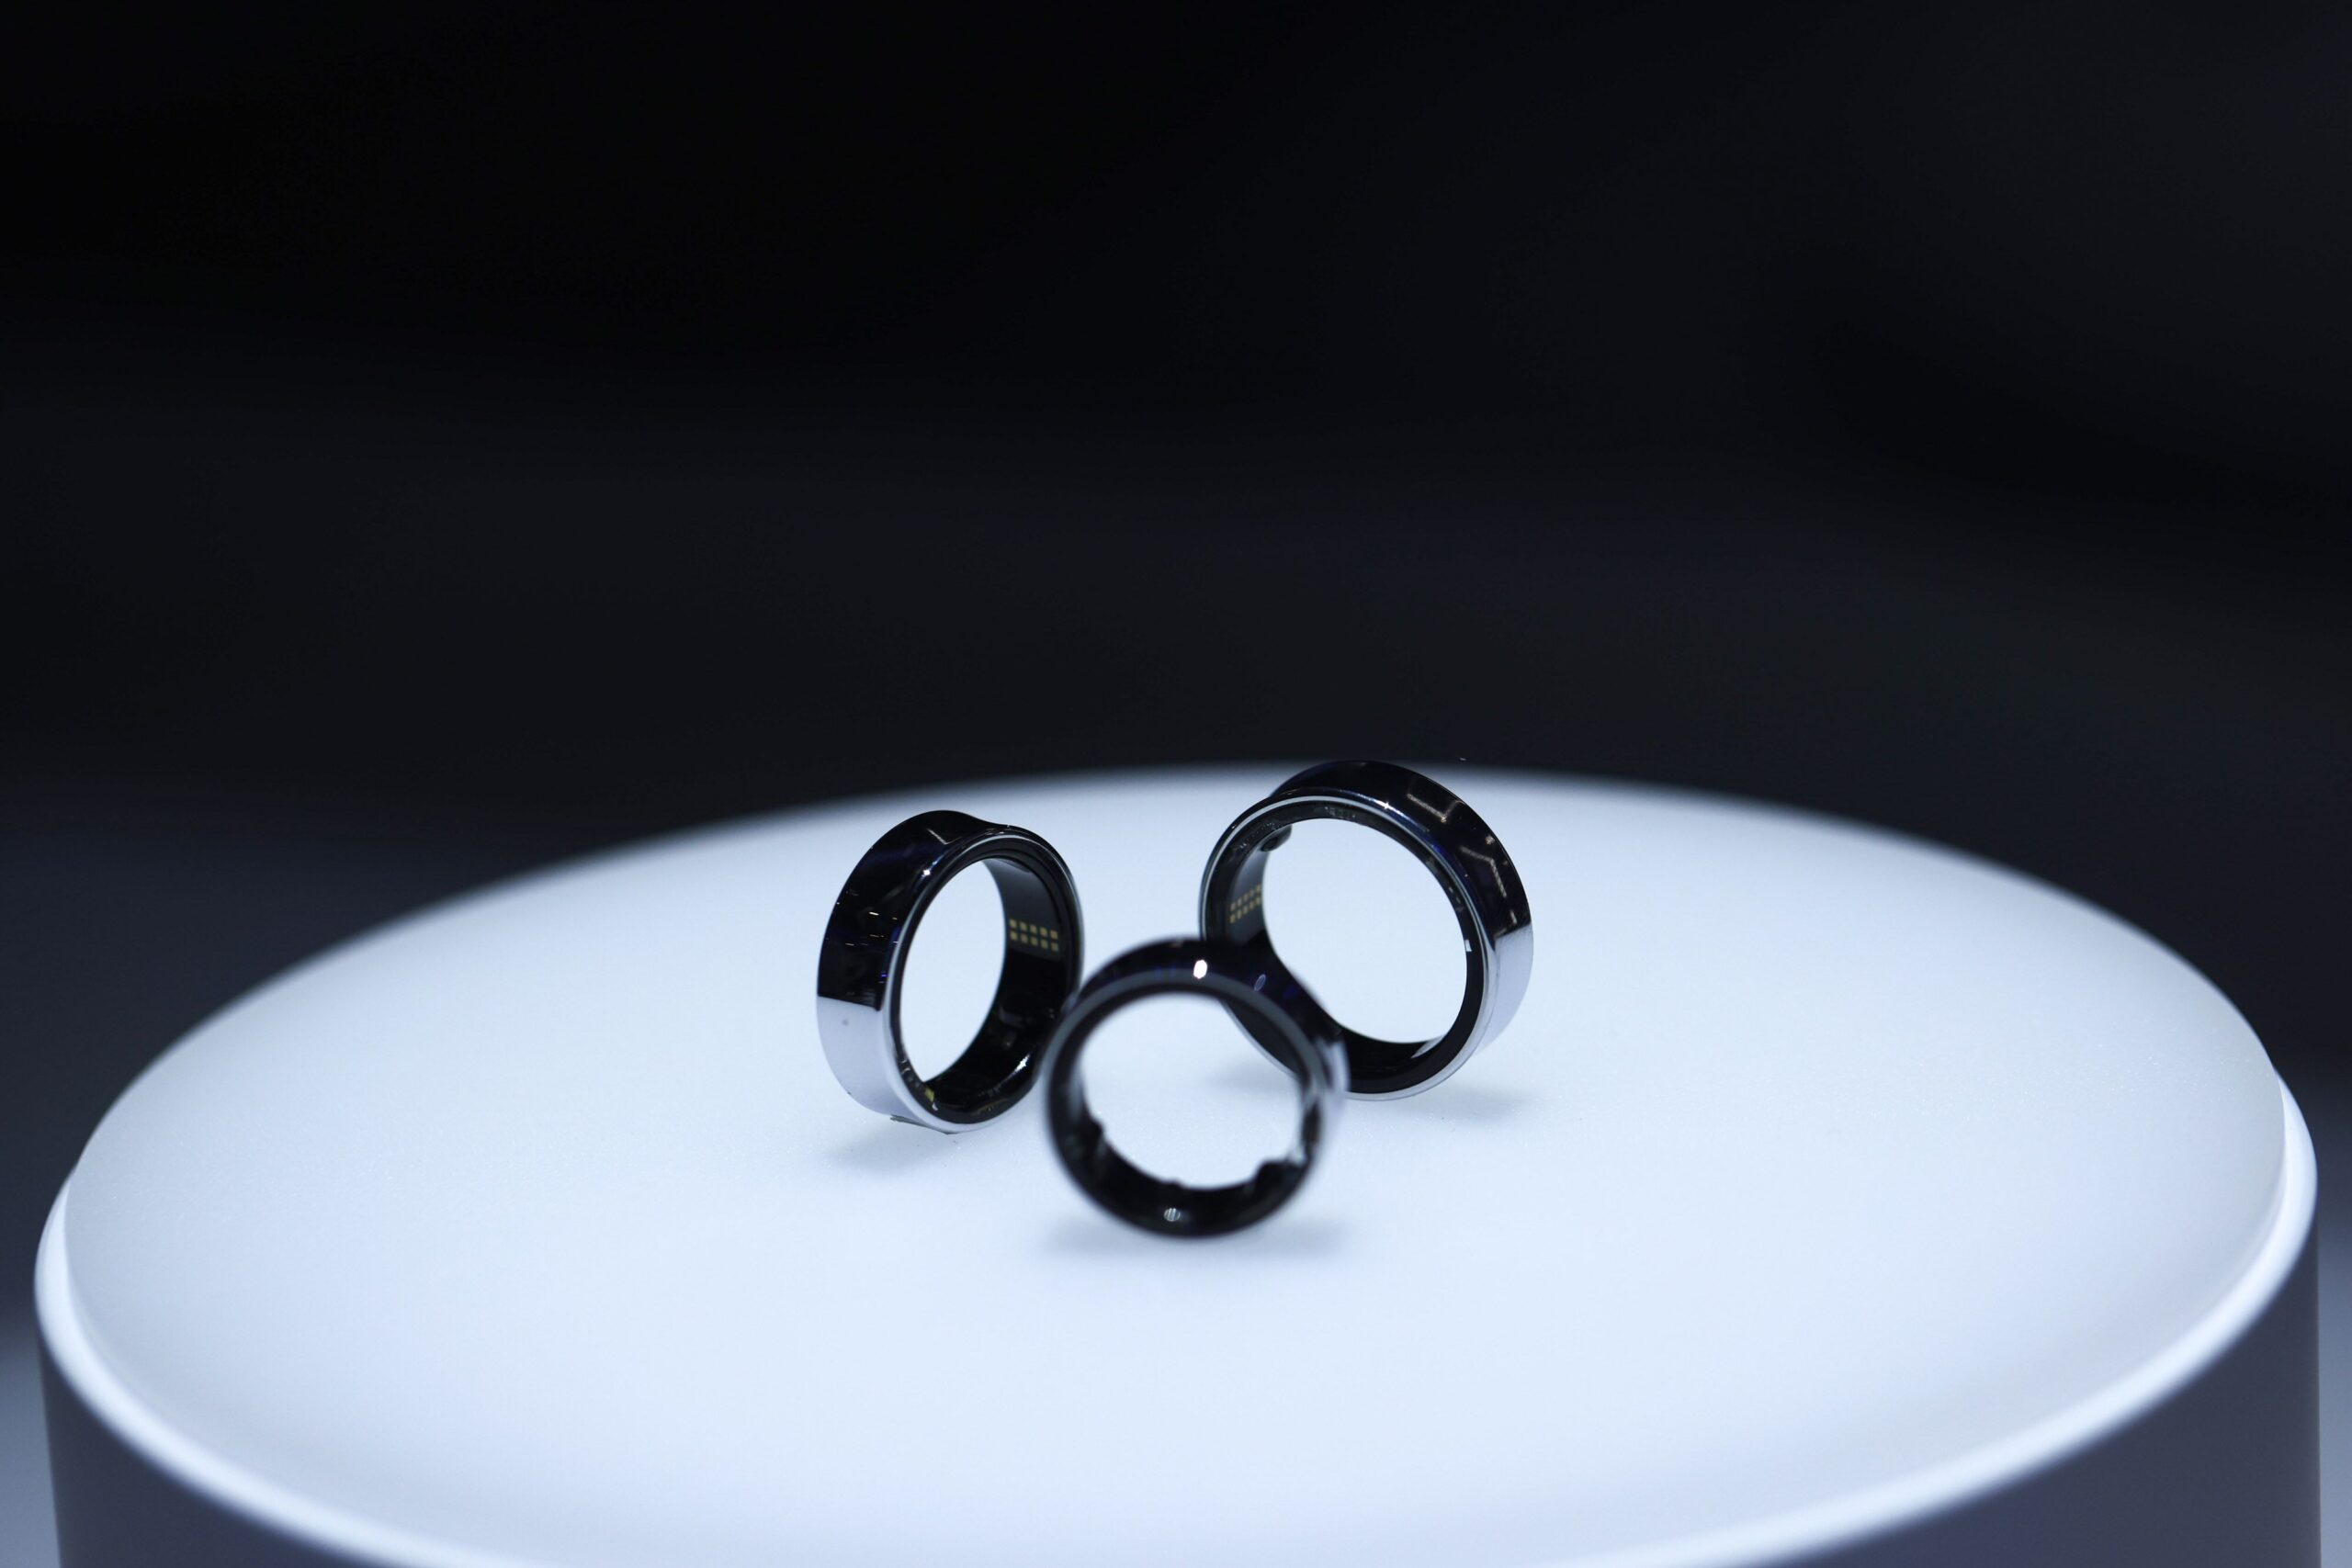 Introducing Galaxy Ring: Samsung’s Foray into Smart Rings with Health Tracking